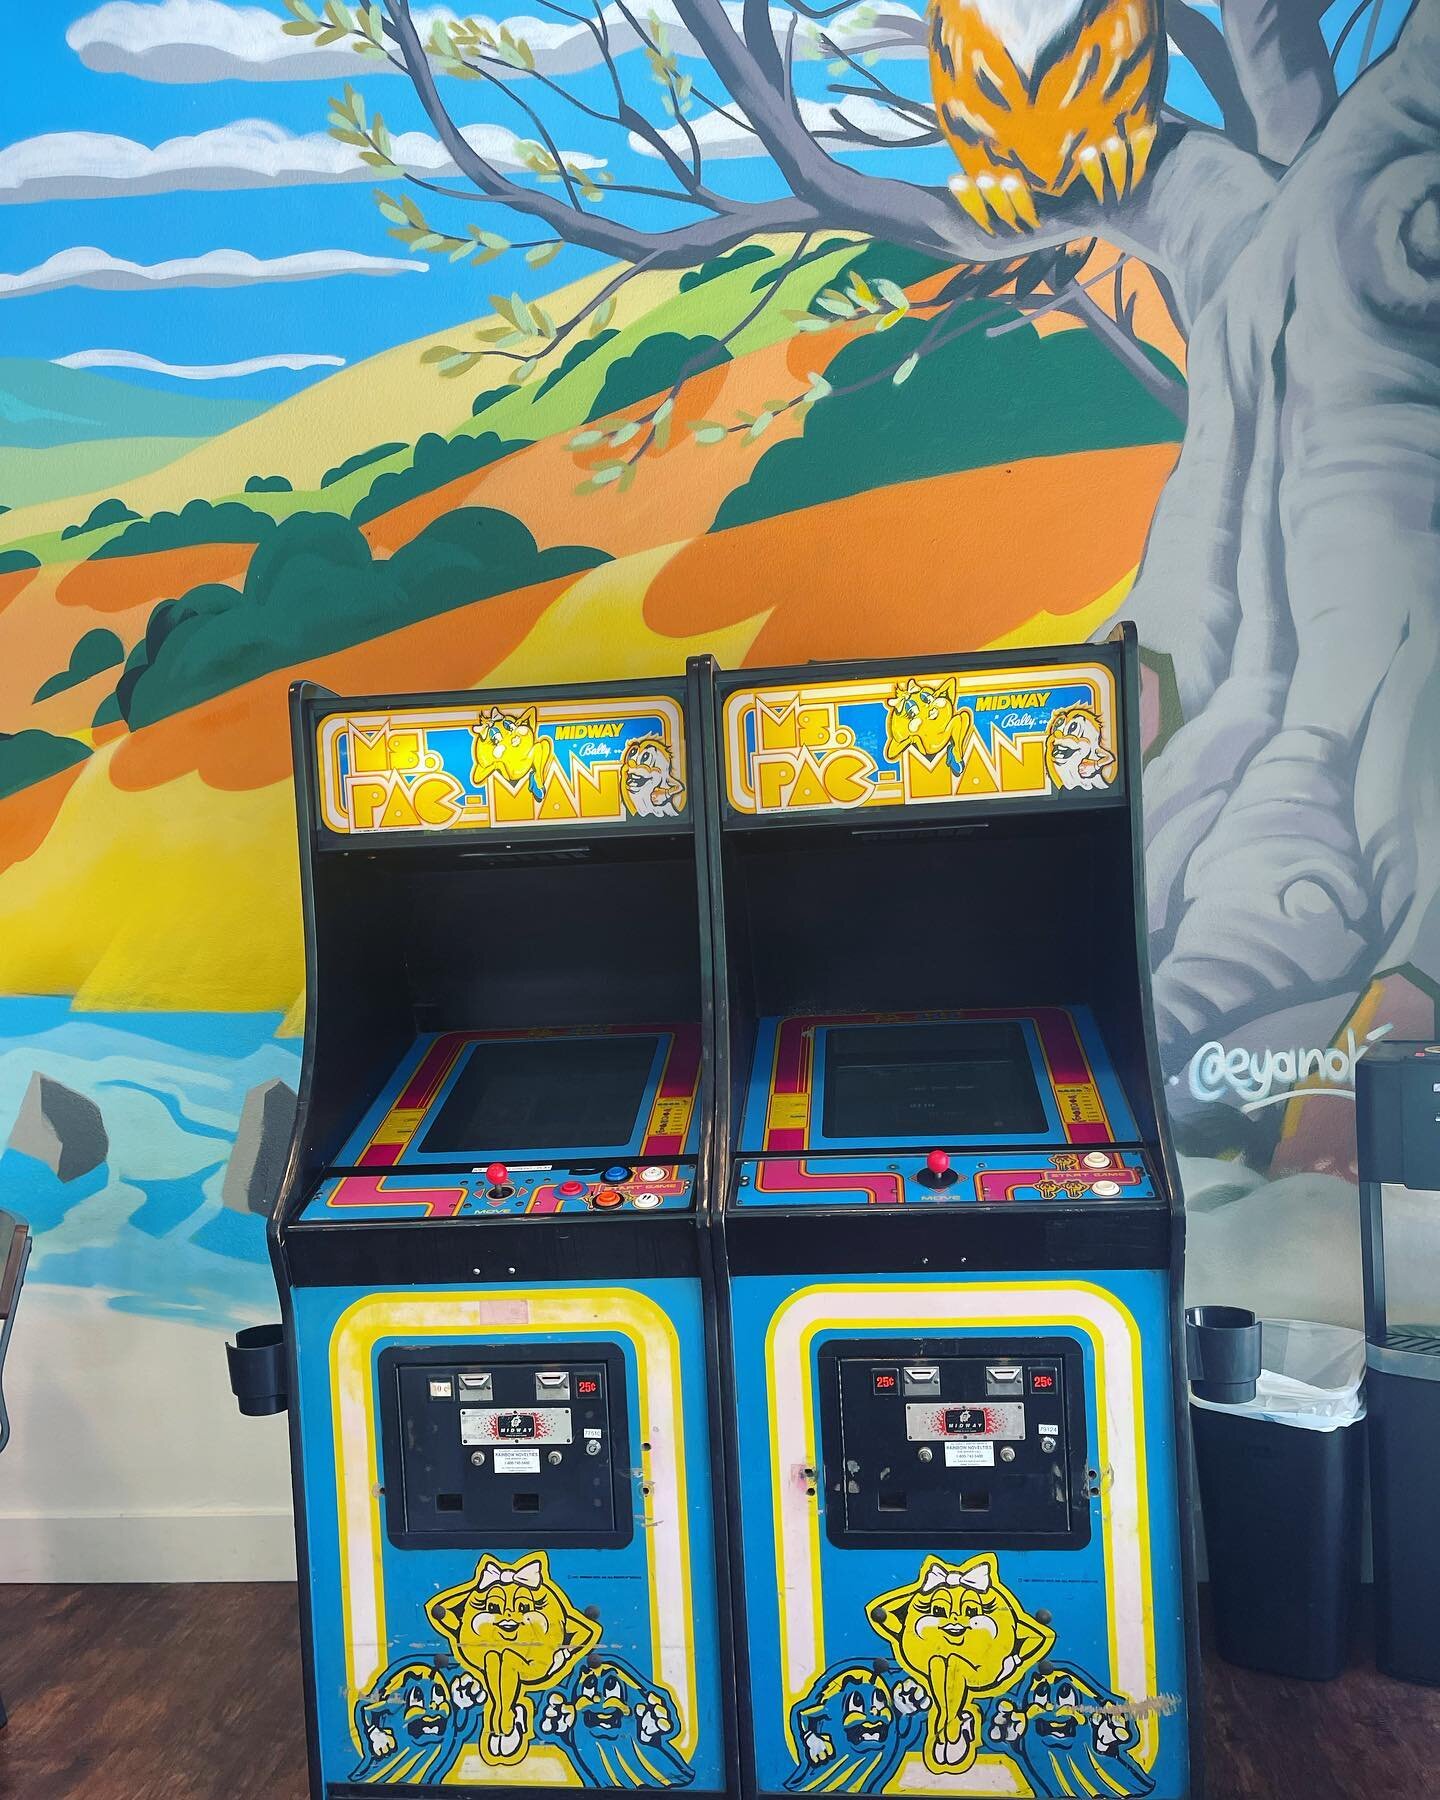 We added a Pac-Man and an emulator game at our Petaluma taproom!  Stop by and try your skill on some of these classics!  Warriors game will also be on at both taprooms with Novato opening 30 min early.
🍻🦉🦌🦉🍻
#craftbeer #videogames #pacman